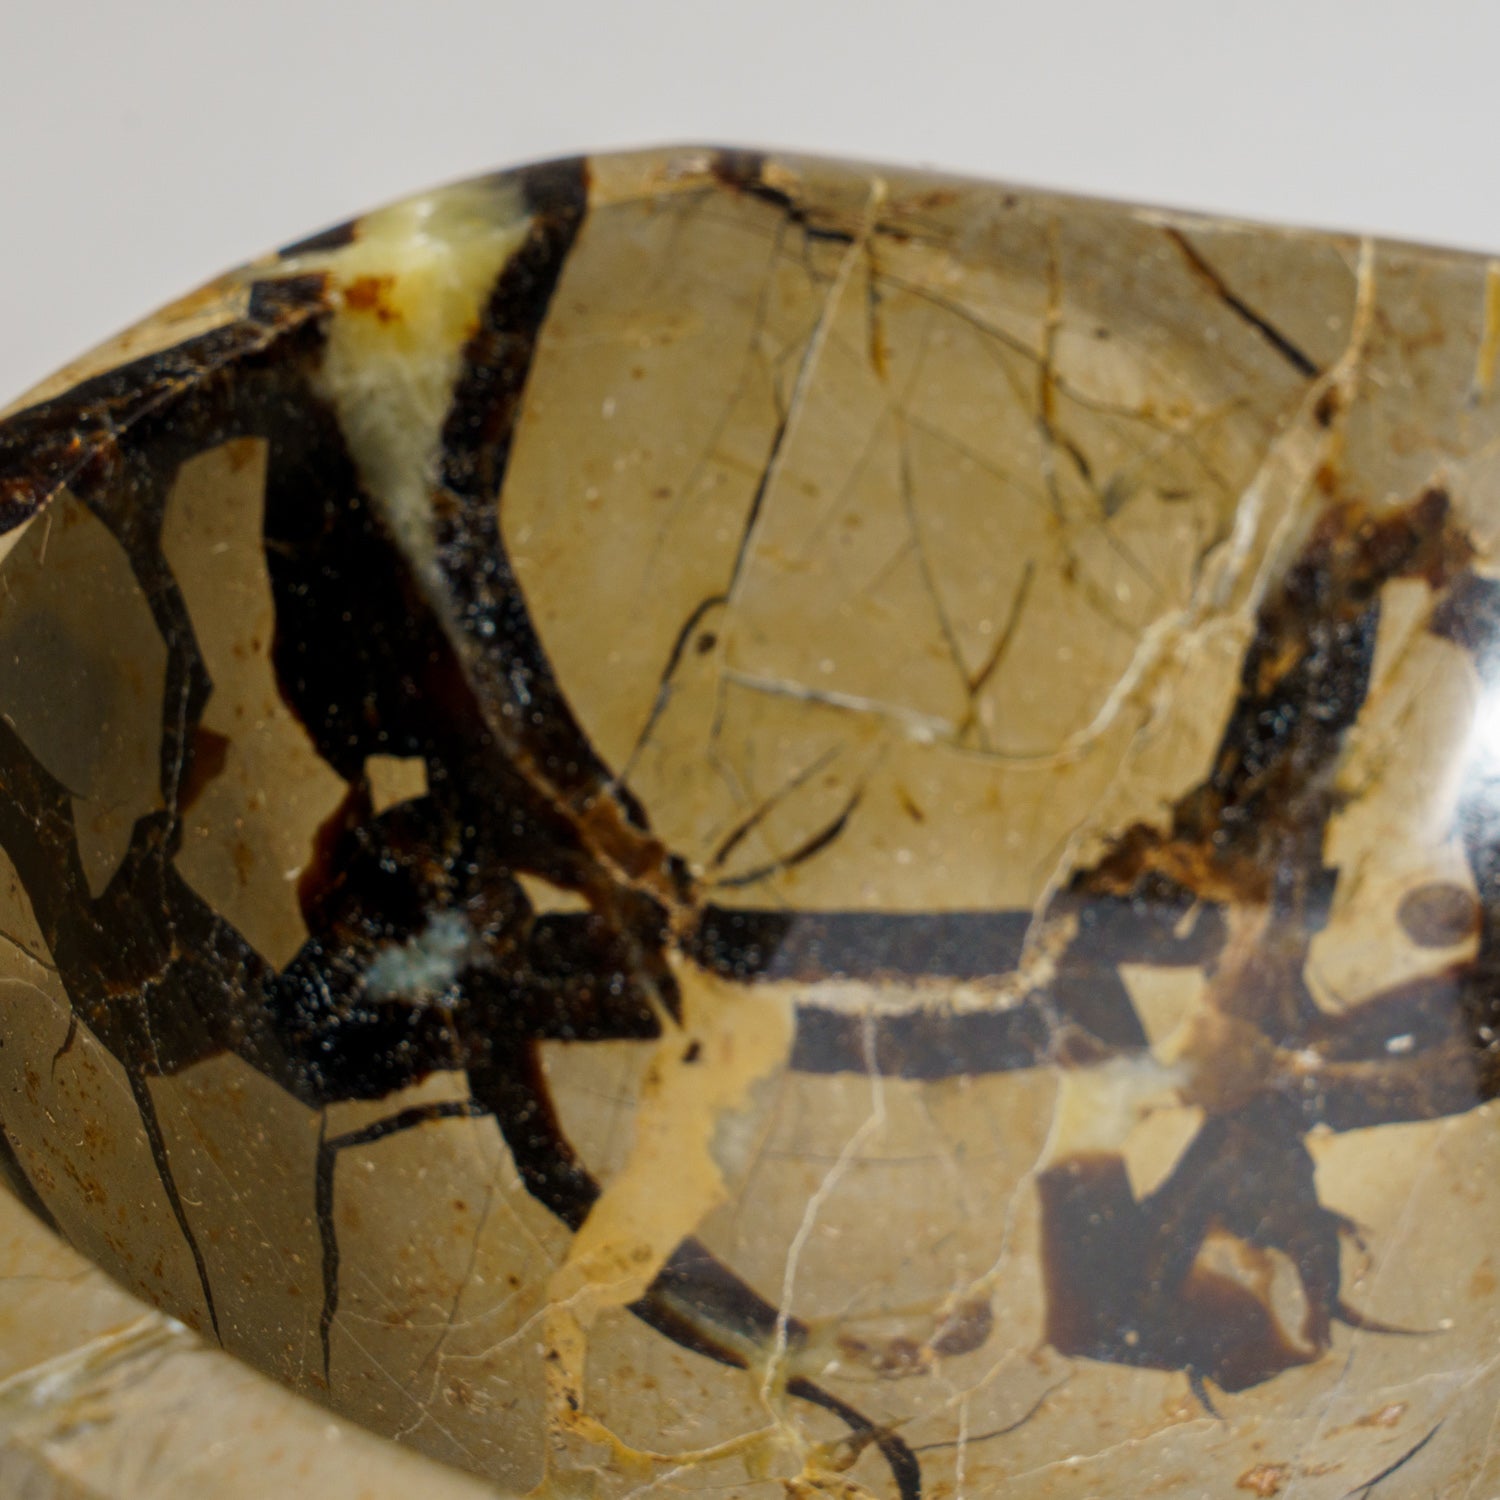 Genuine Polished Septarian Bowl from Madagascar (3.5 lbs)